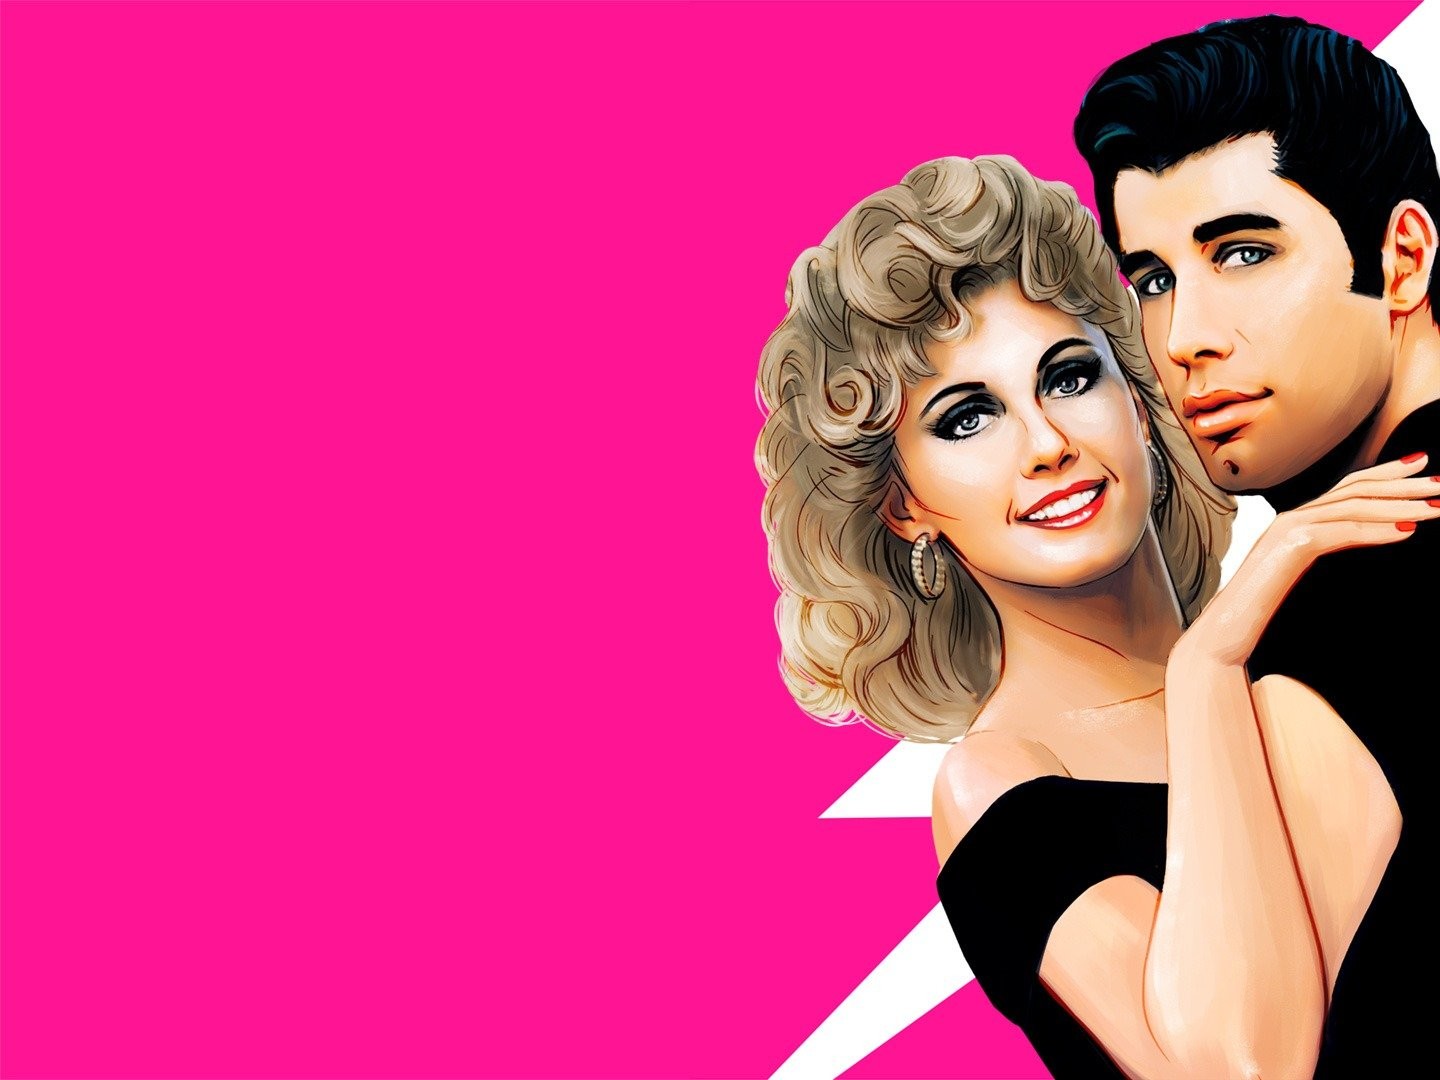 Download Grease wallpapers for mobile phone free Grease HD pictures